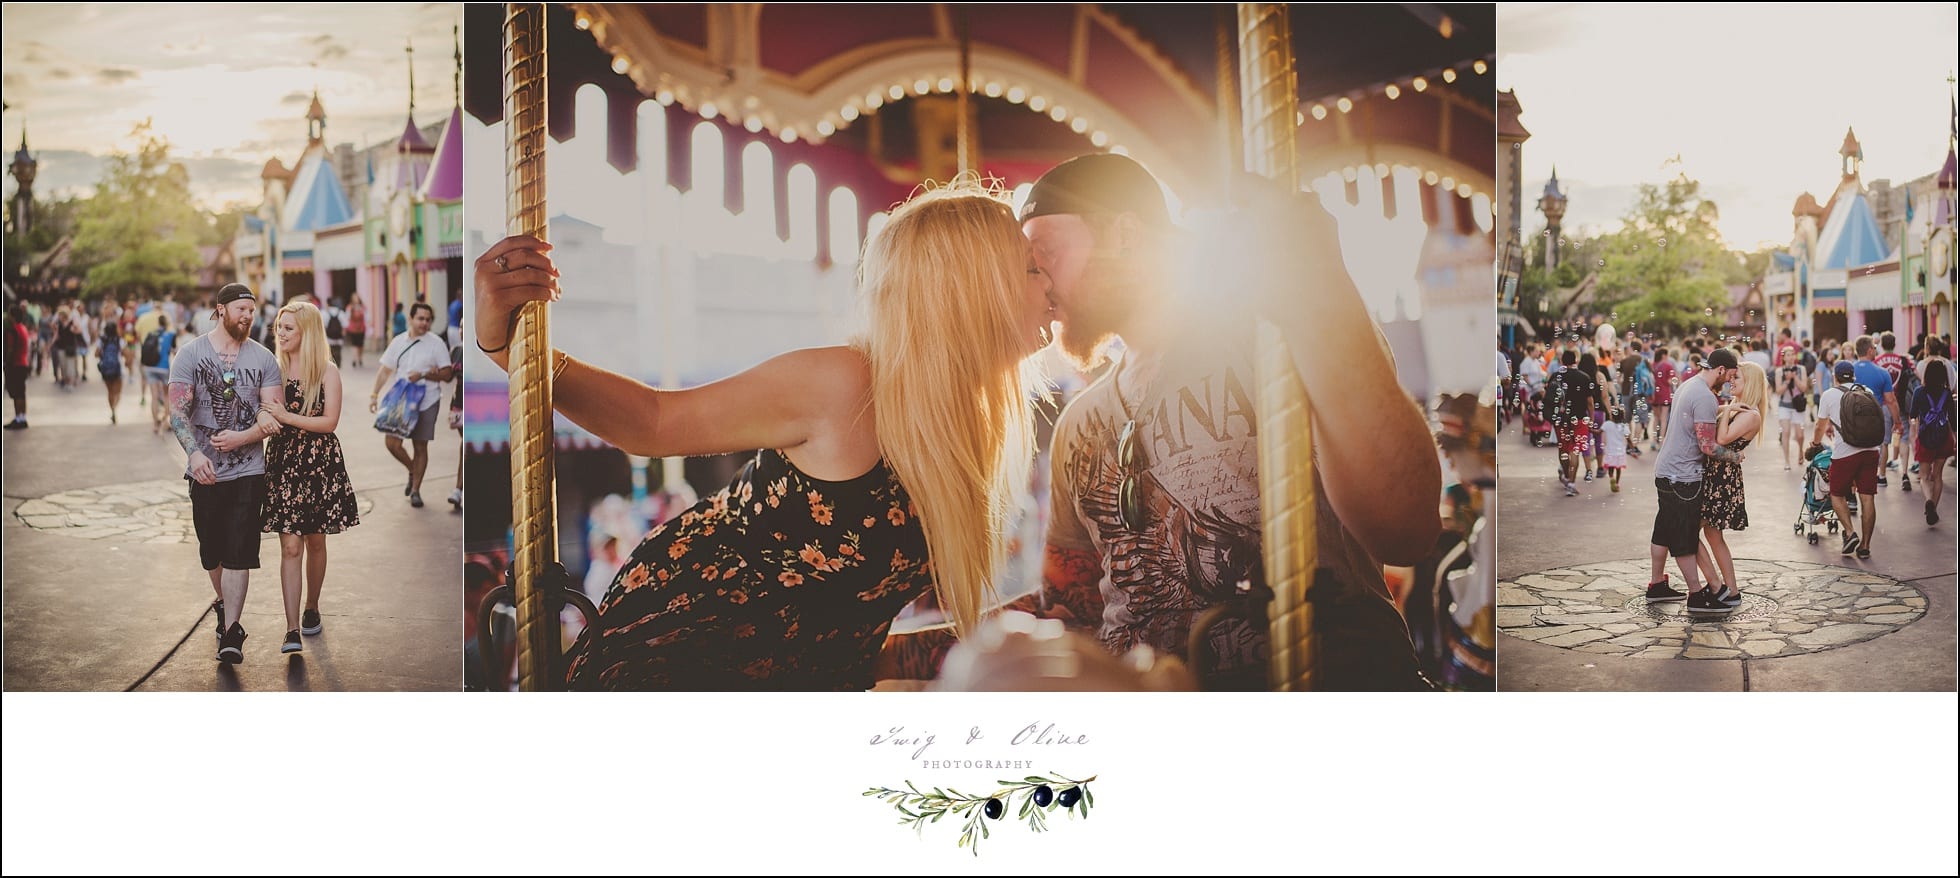 sunset photography, Magic Kingdom photography, honeymoon session, Walt Disney, Mickey Mouse, carousel, kissing, happy couples, married at Disney, Sun Prairie area photographers, Madison Metro area photography, Twig and Olive